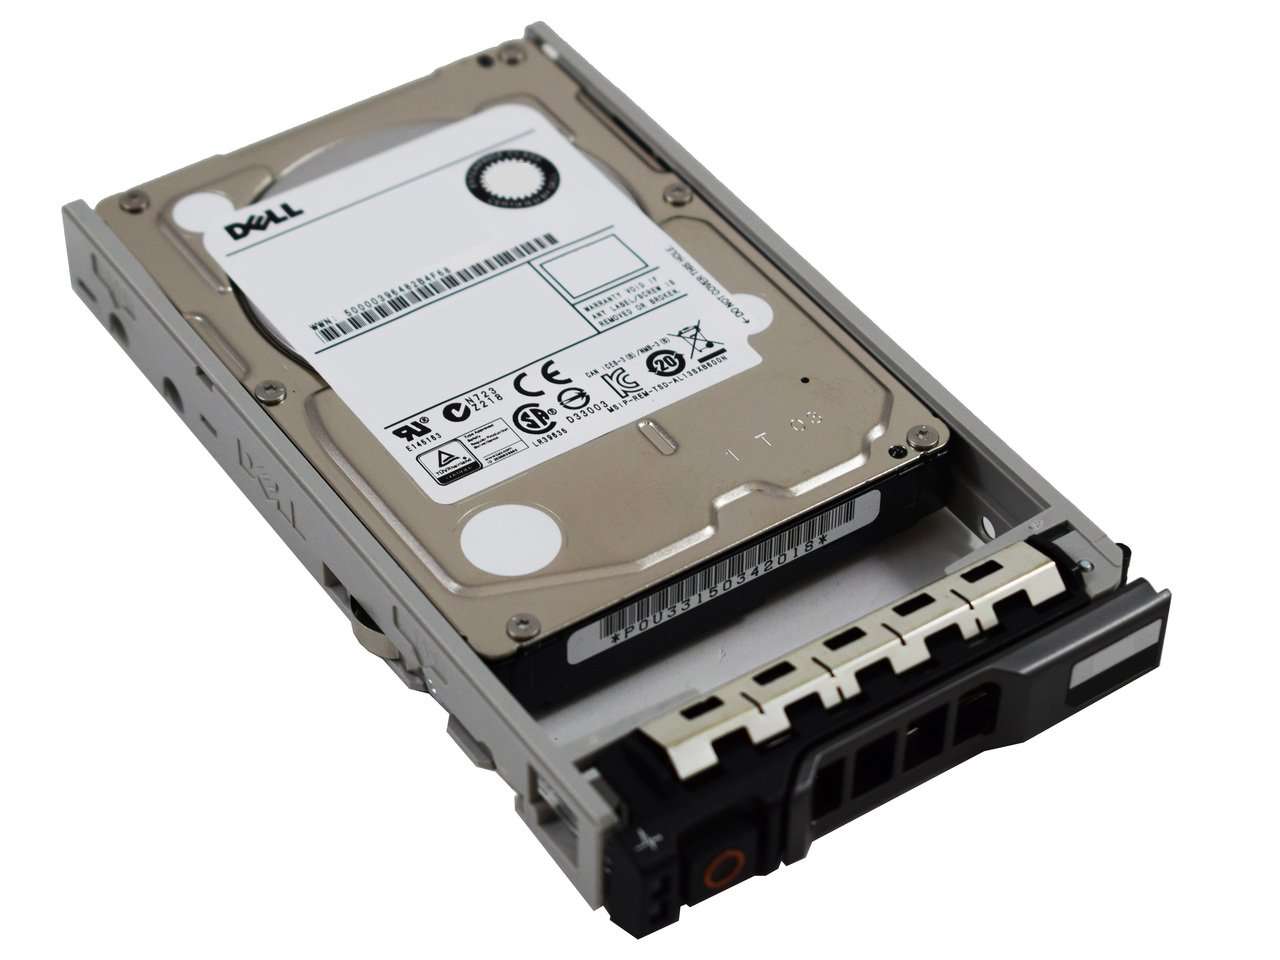 Dell G13 400-AHNO 1.2TB 10K RPM SAS 12Gb/s 512n 2.5" SED Manufacturer Recertified HDD